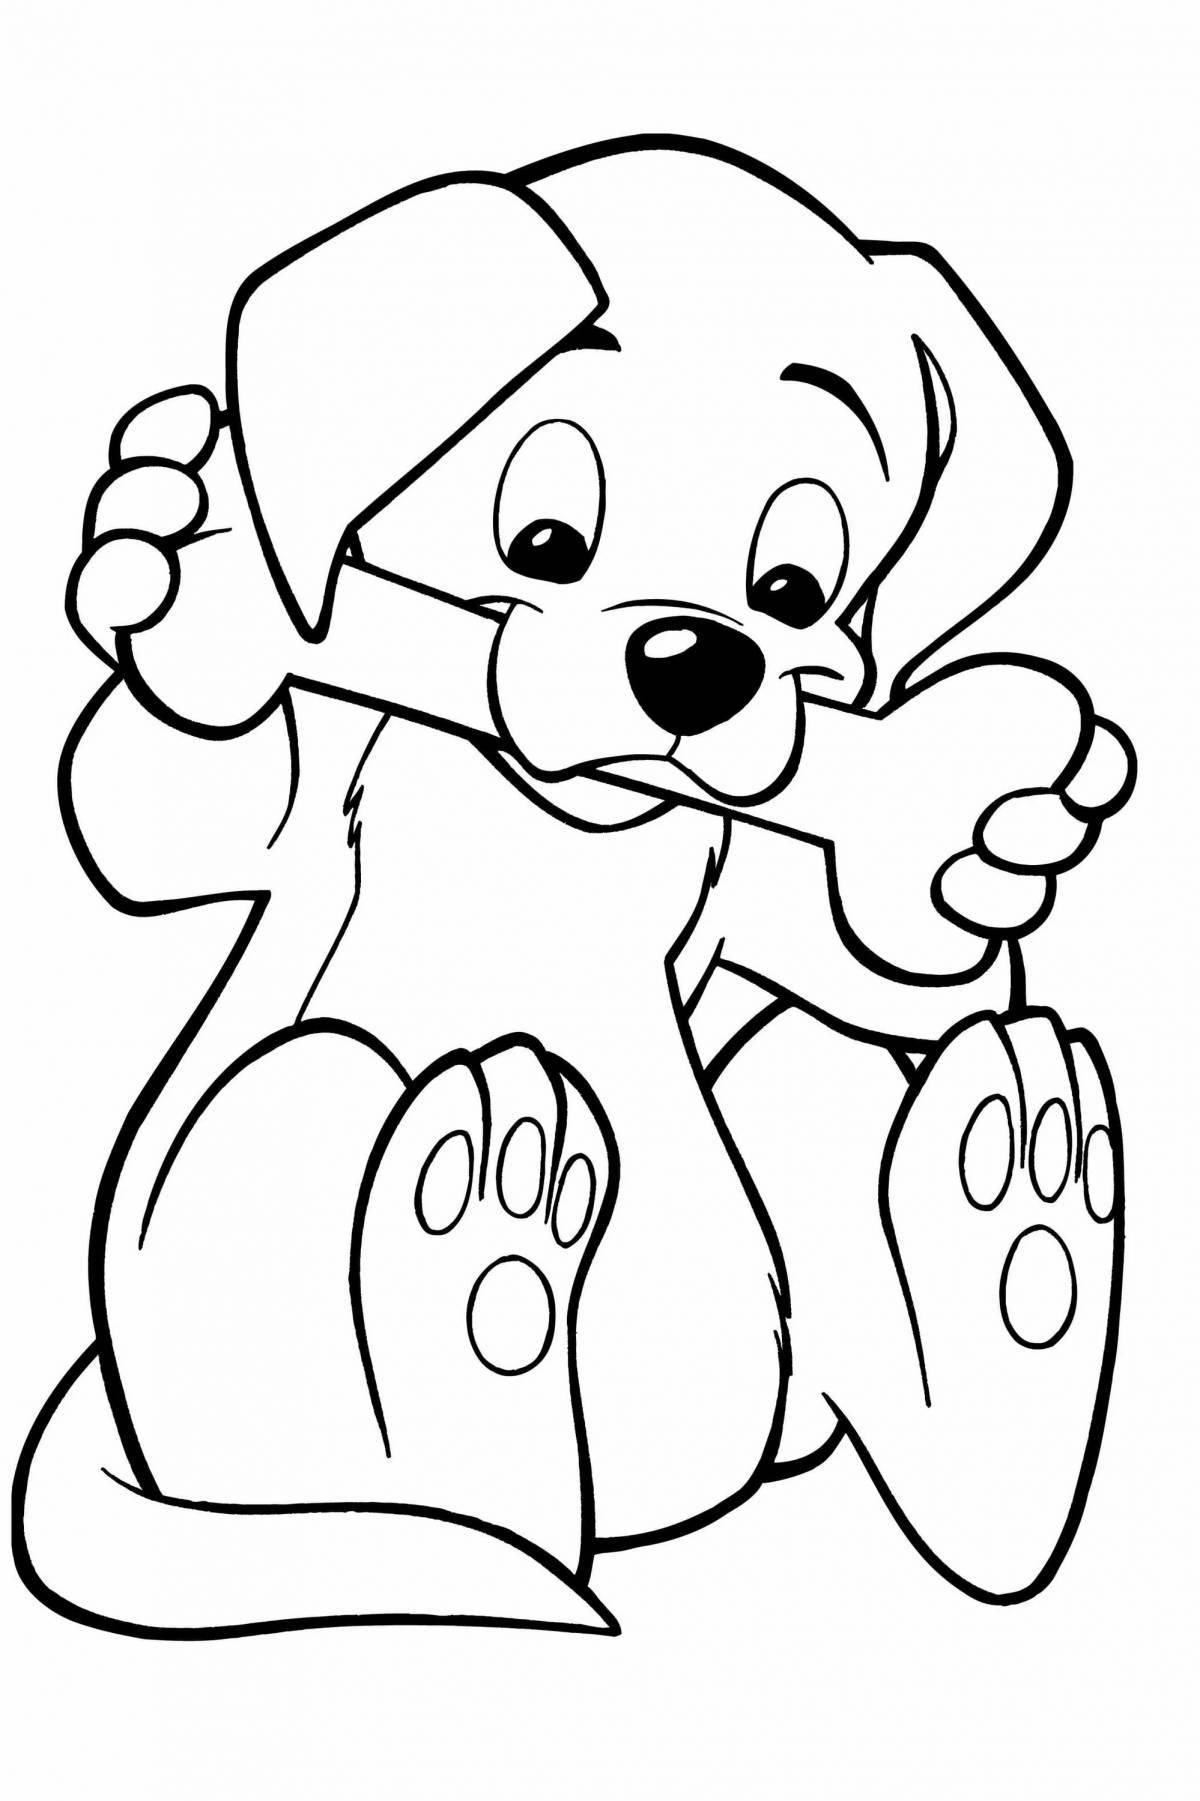 Cute puppy coloring book for toddlers